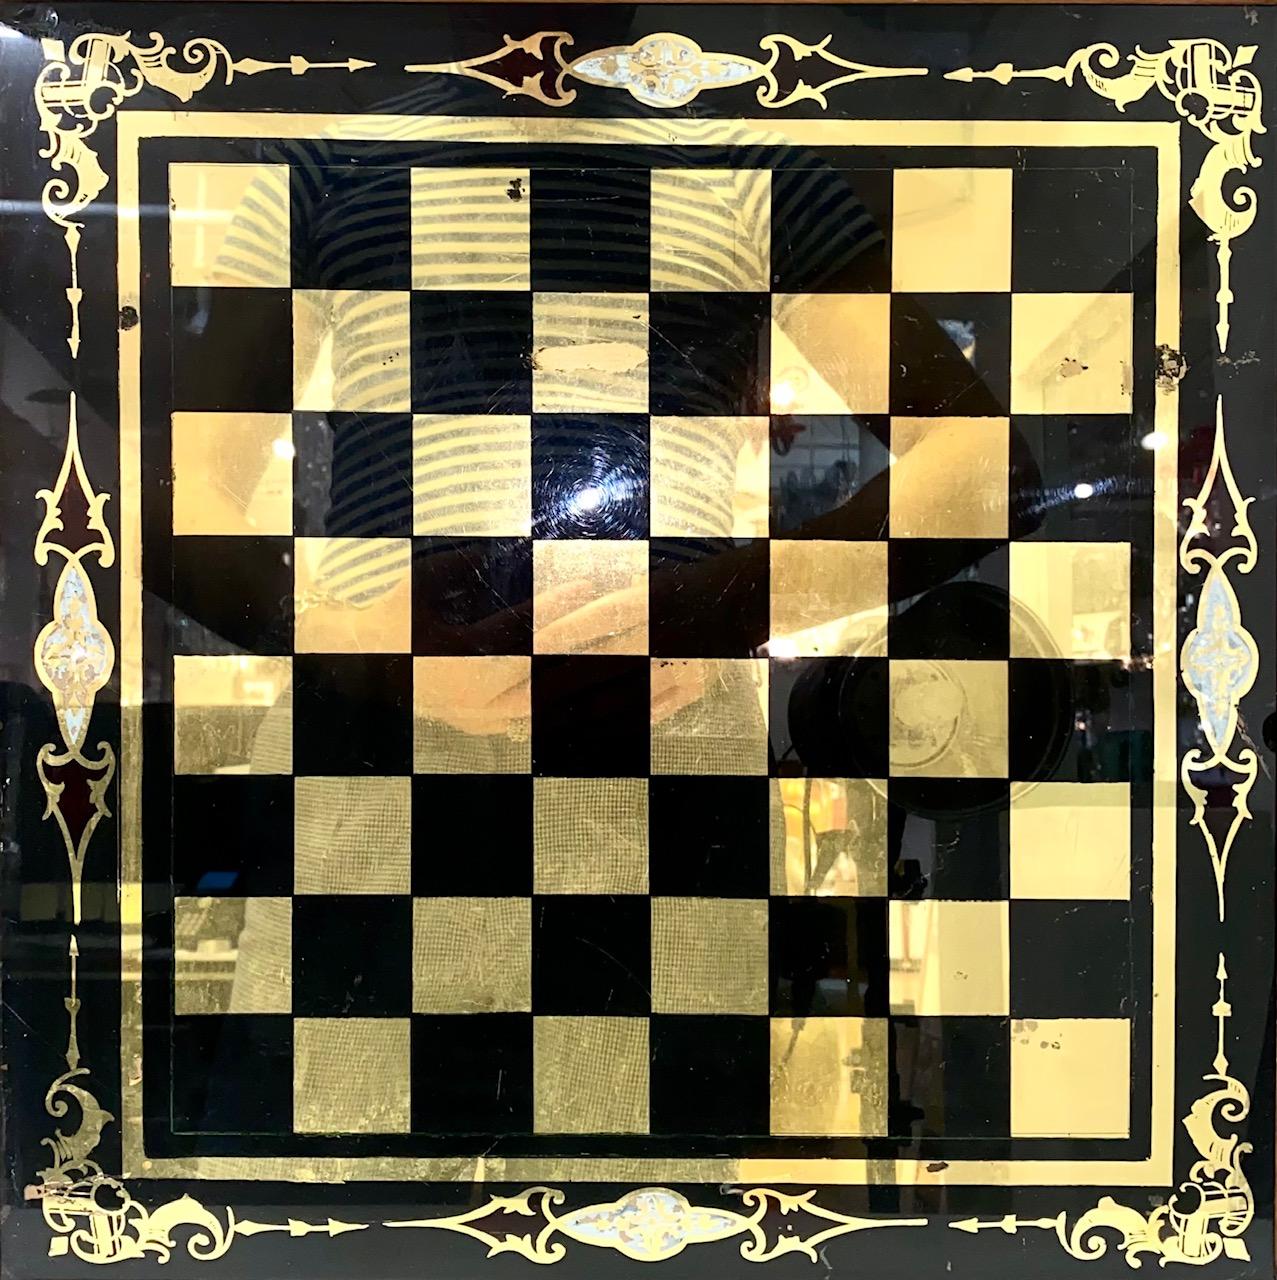 19th century eglomise mirrored chessboard framed in wood, made in the 1870s. Elaborate blue and gold decorations around the chessboard. Small nick on the wood frame, but otherwise in good antique condition. 

Dealer: R316TF.